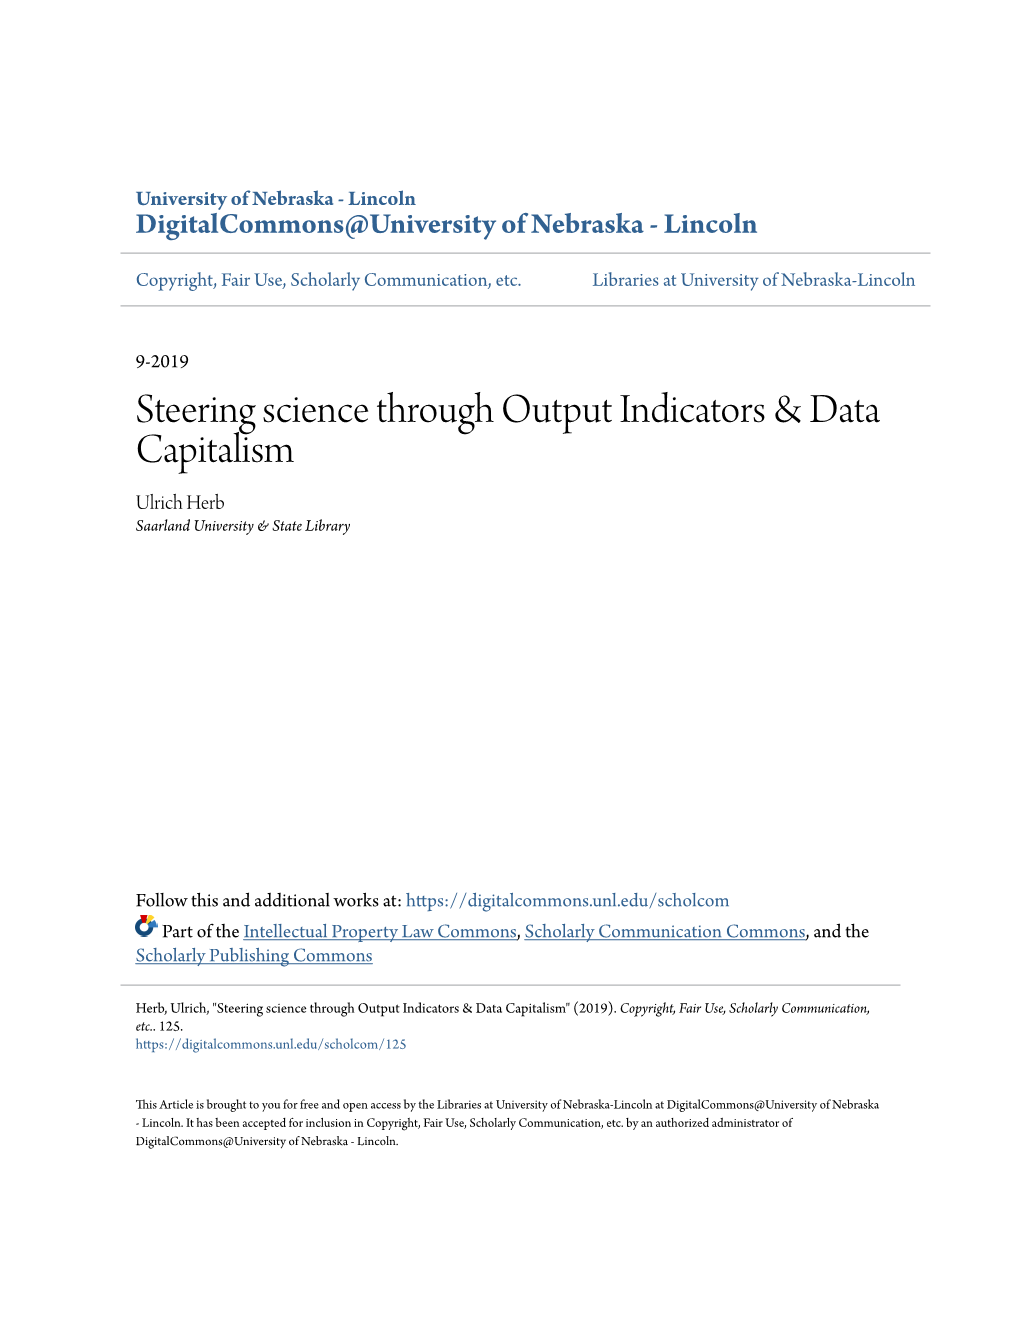 Steering Science Through Output Indicators & Data Capitalism